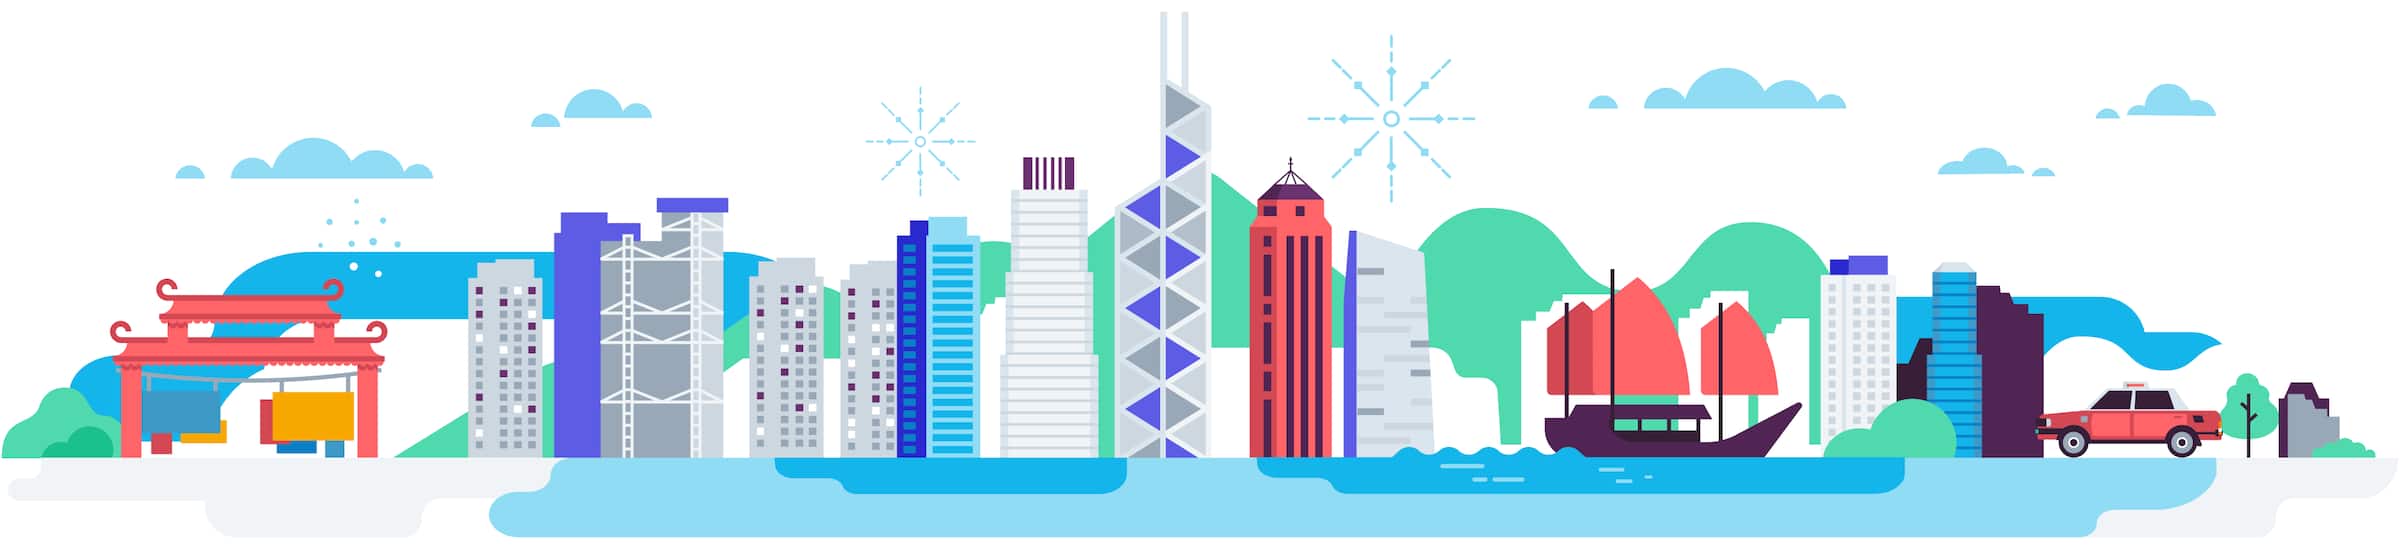 A header image for Xero’s Hong Kong’s offices shows some of the city’s best-known landmarks and attractions. 